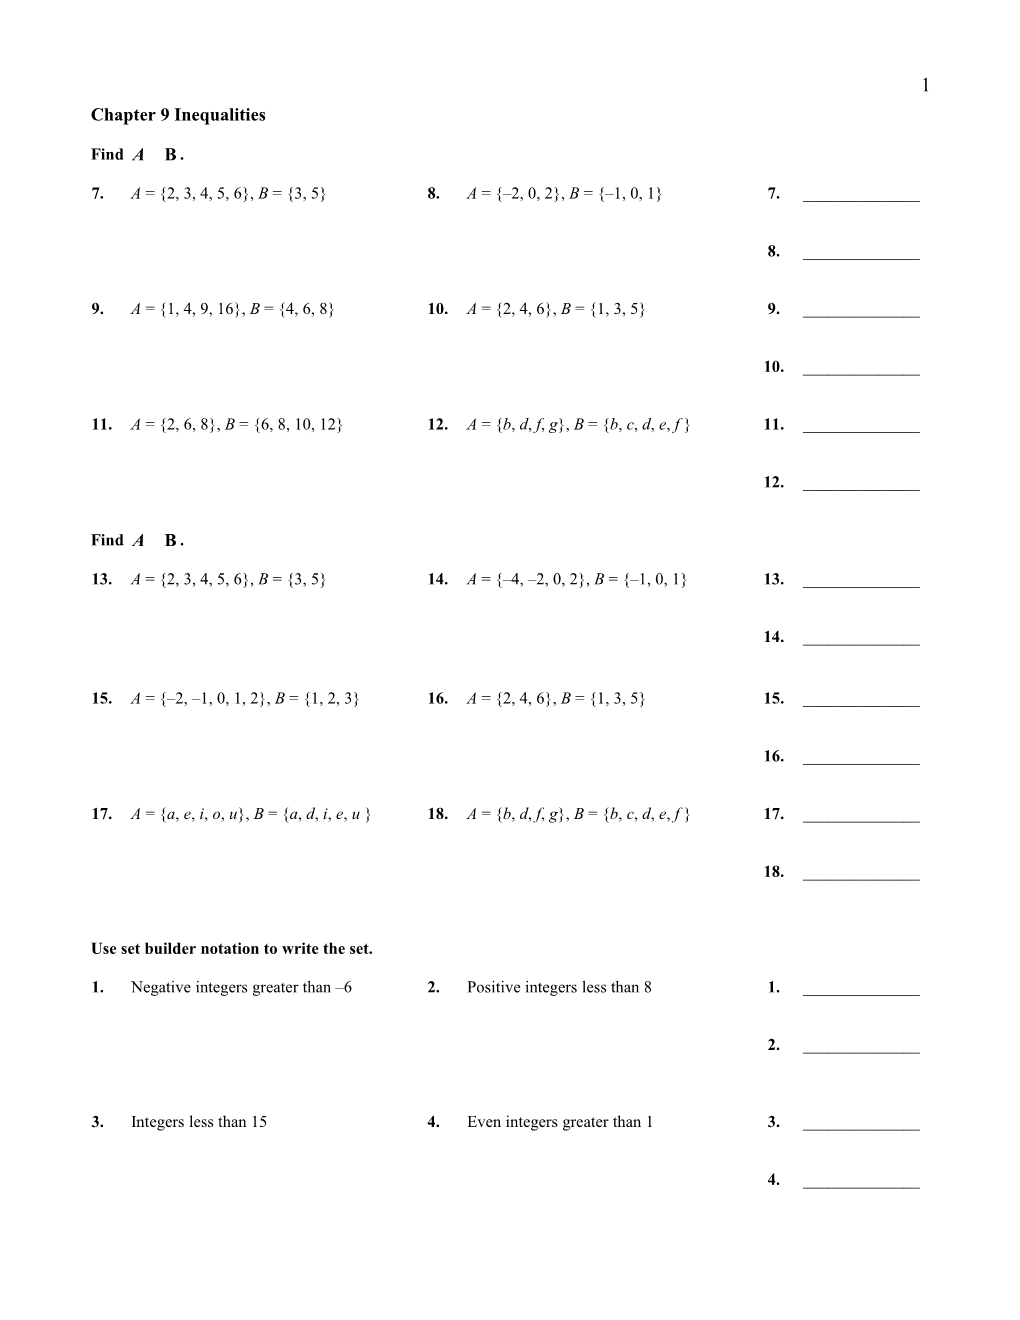 Chapter 9 Drill Sheets Intro, 7E, ABL